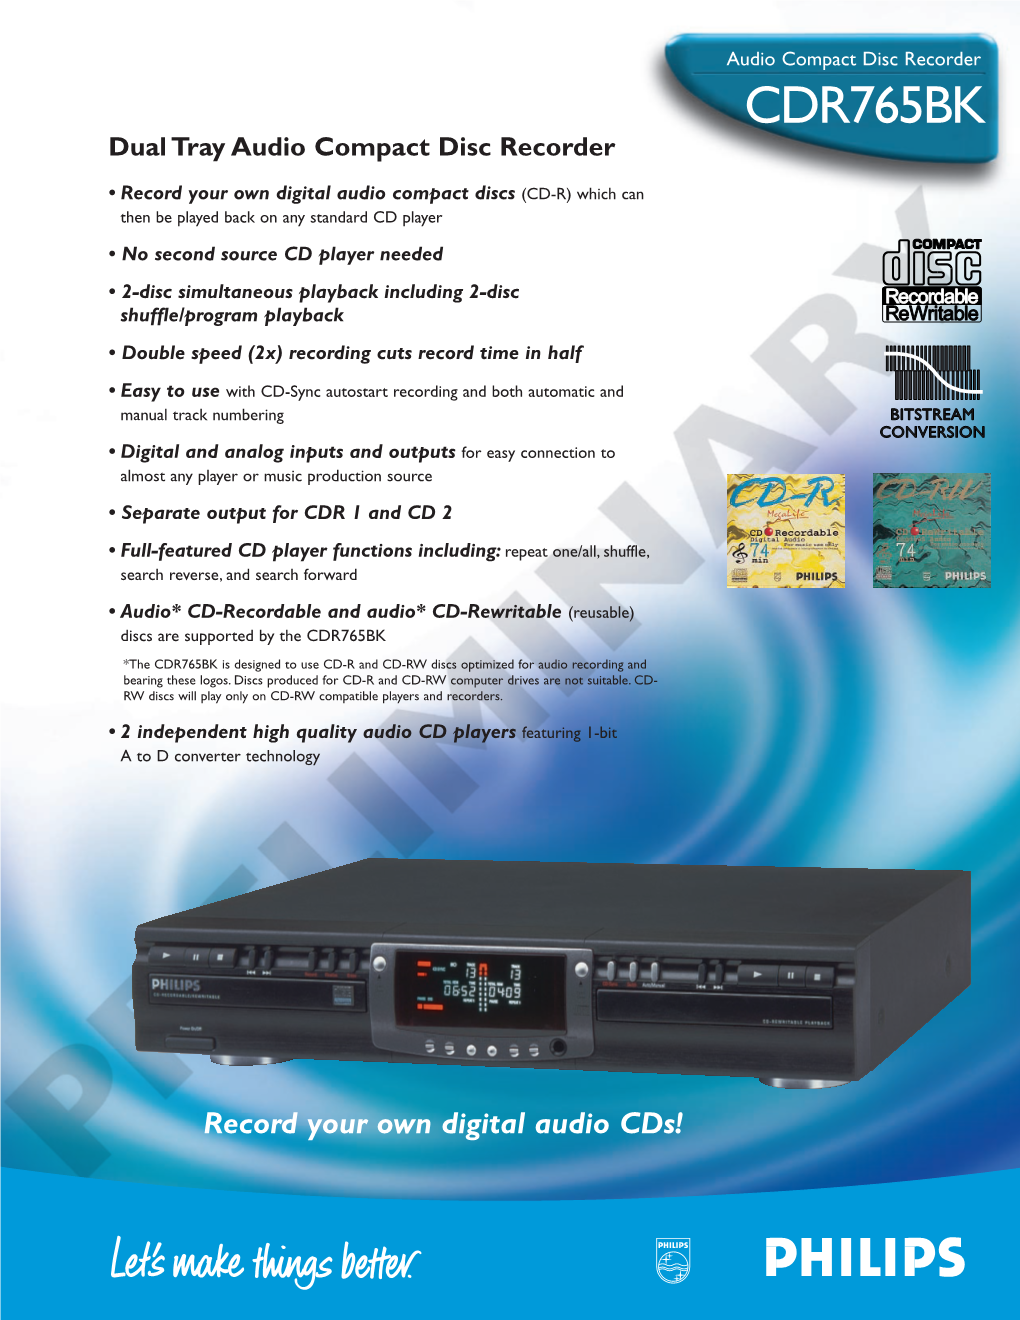 CDR765BK Dual Tray Audio Compact Disc Recorder